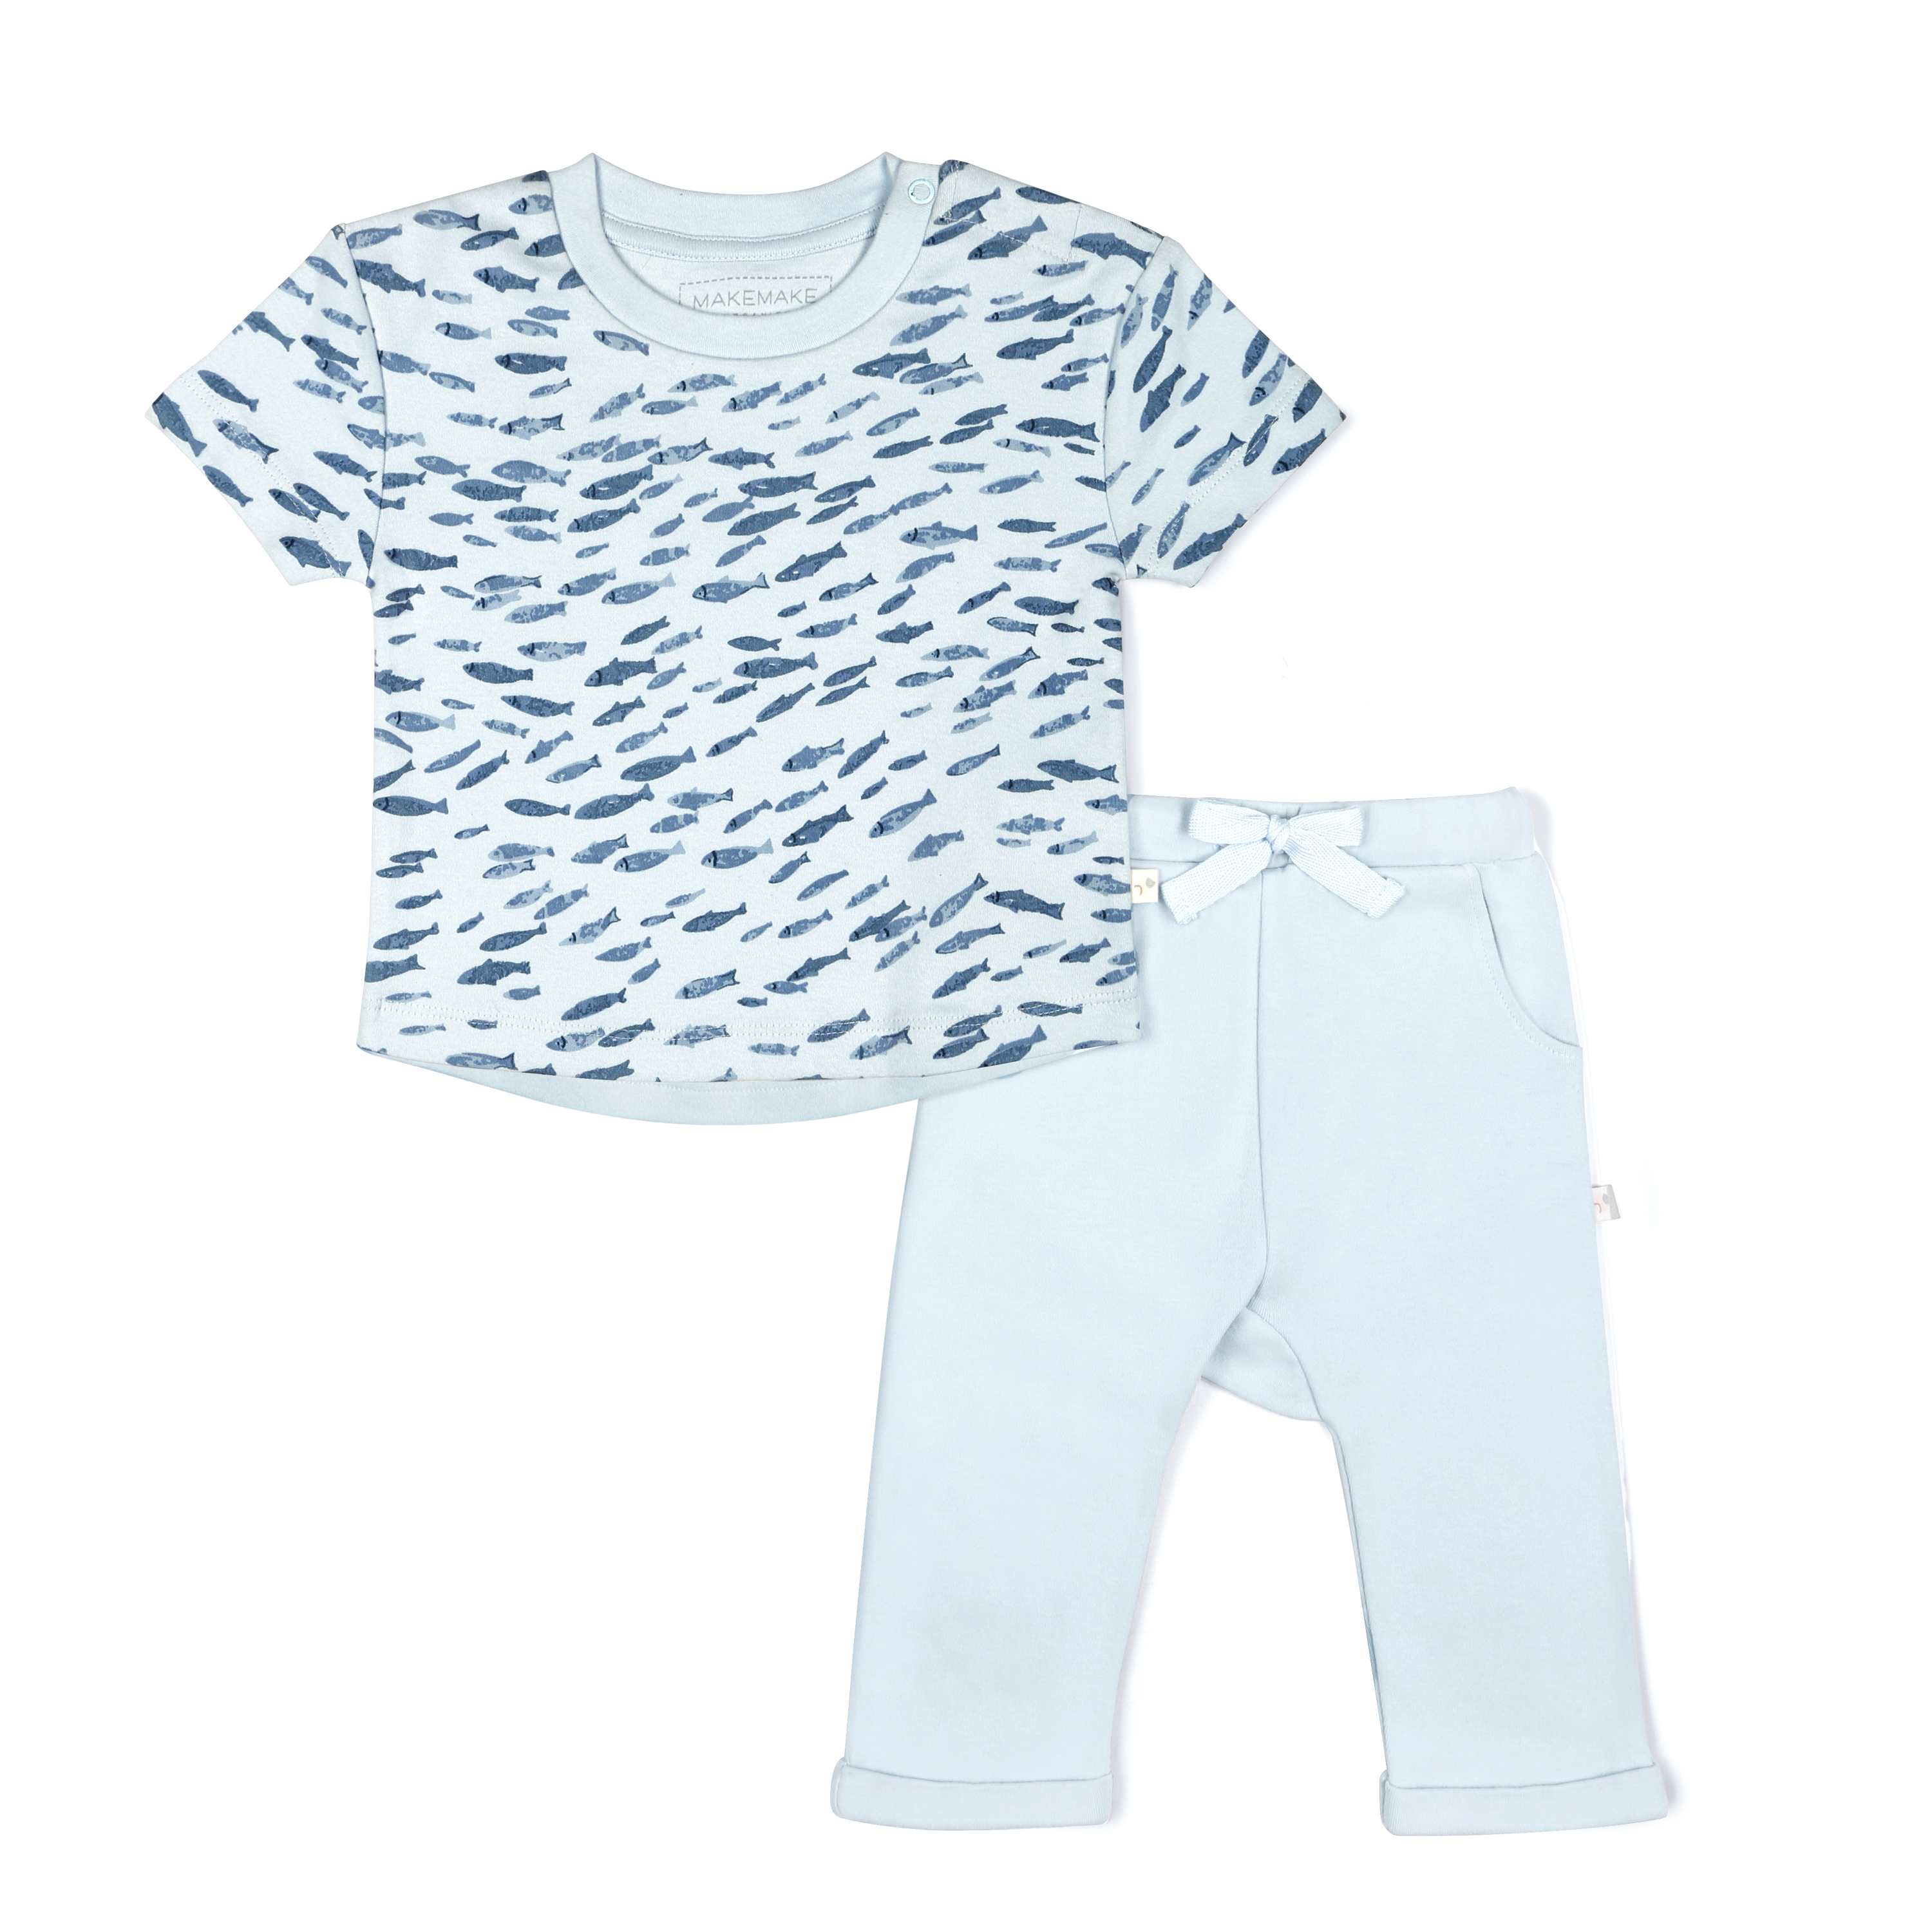 A pale blue baby outfit consisting of a Organic Tee & Pants Set from Minnow, with a t-shirt featuring small black and white animal print and matching plain blue pants with a decorative bow on the left side. Created by Makemake Organics.